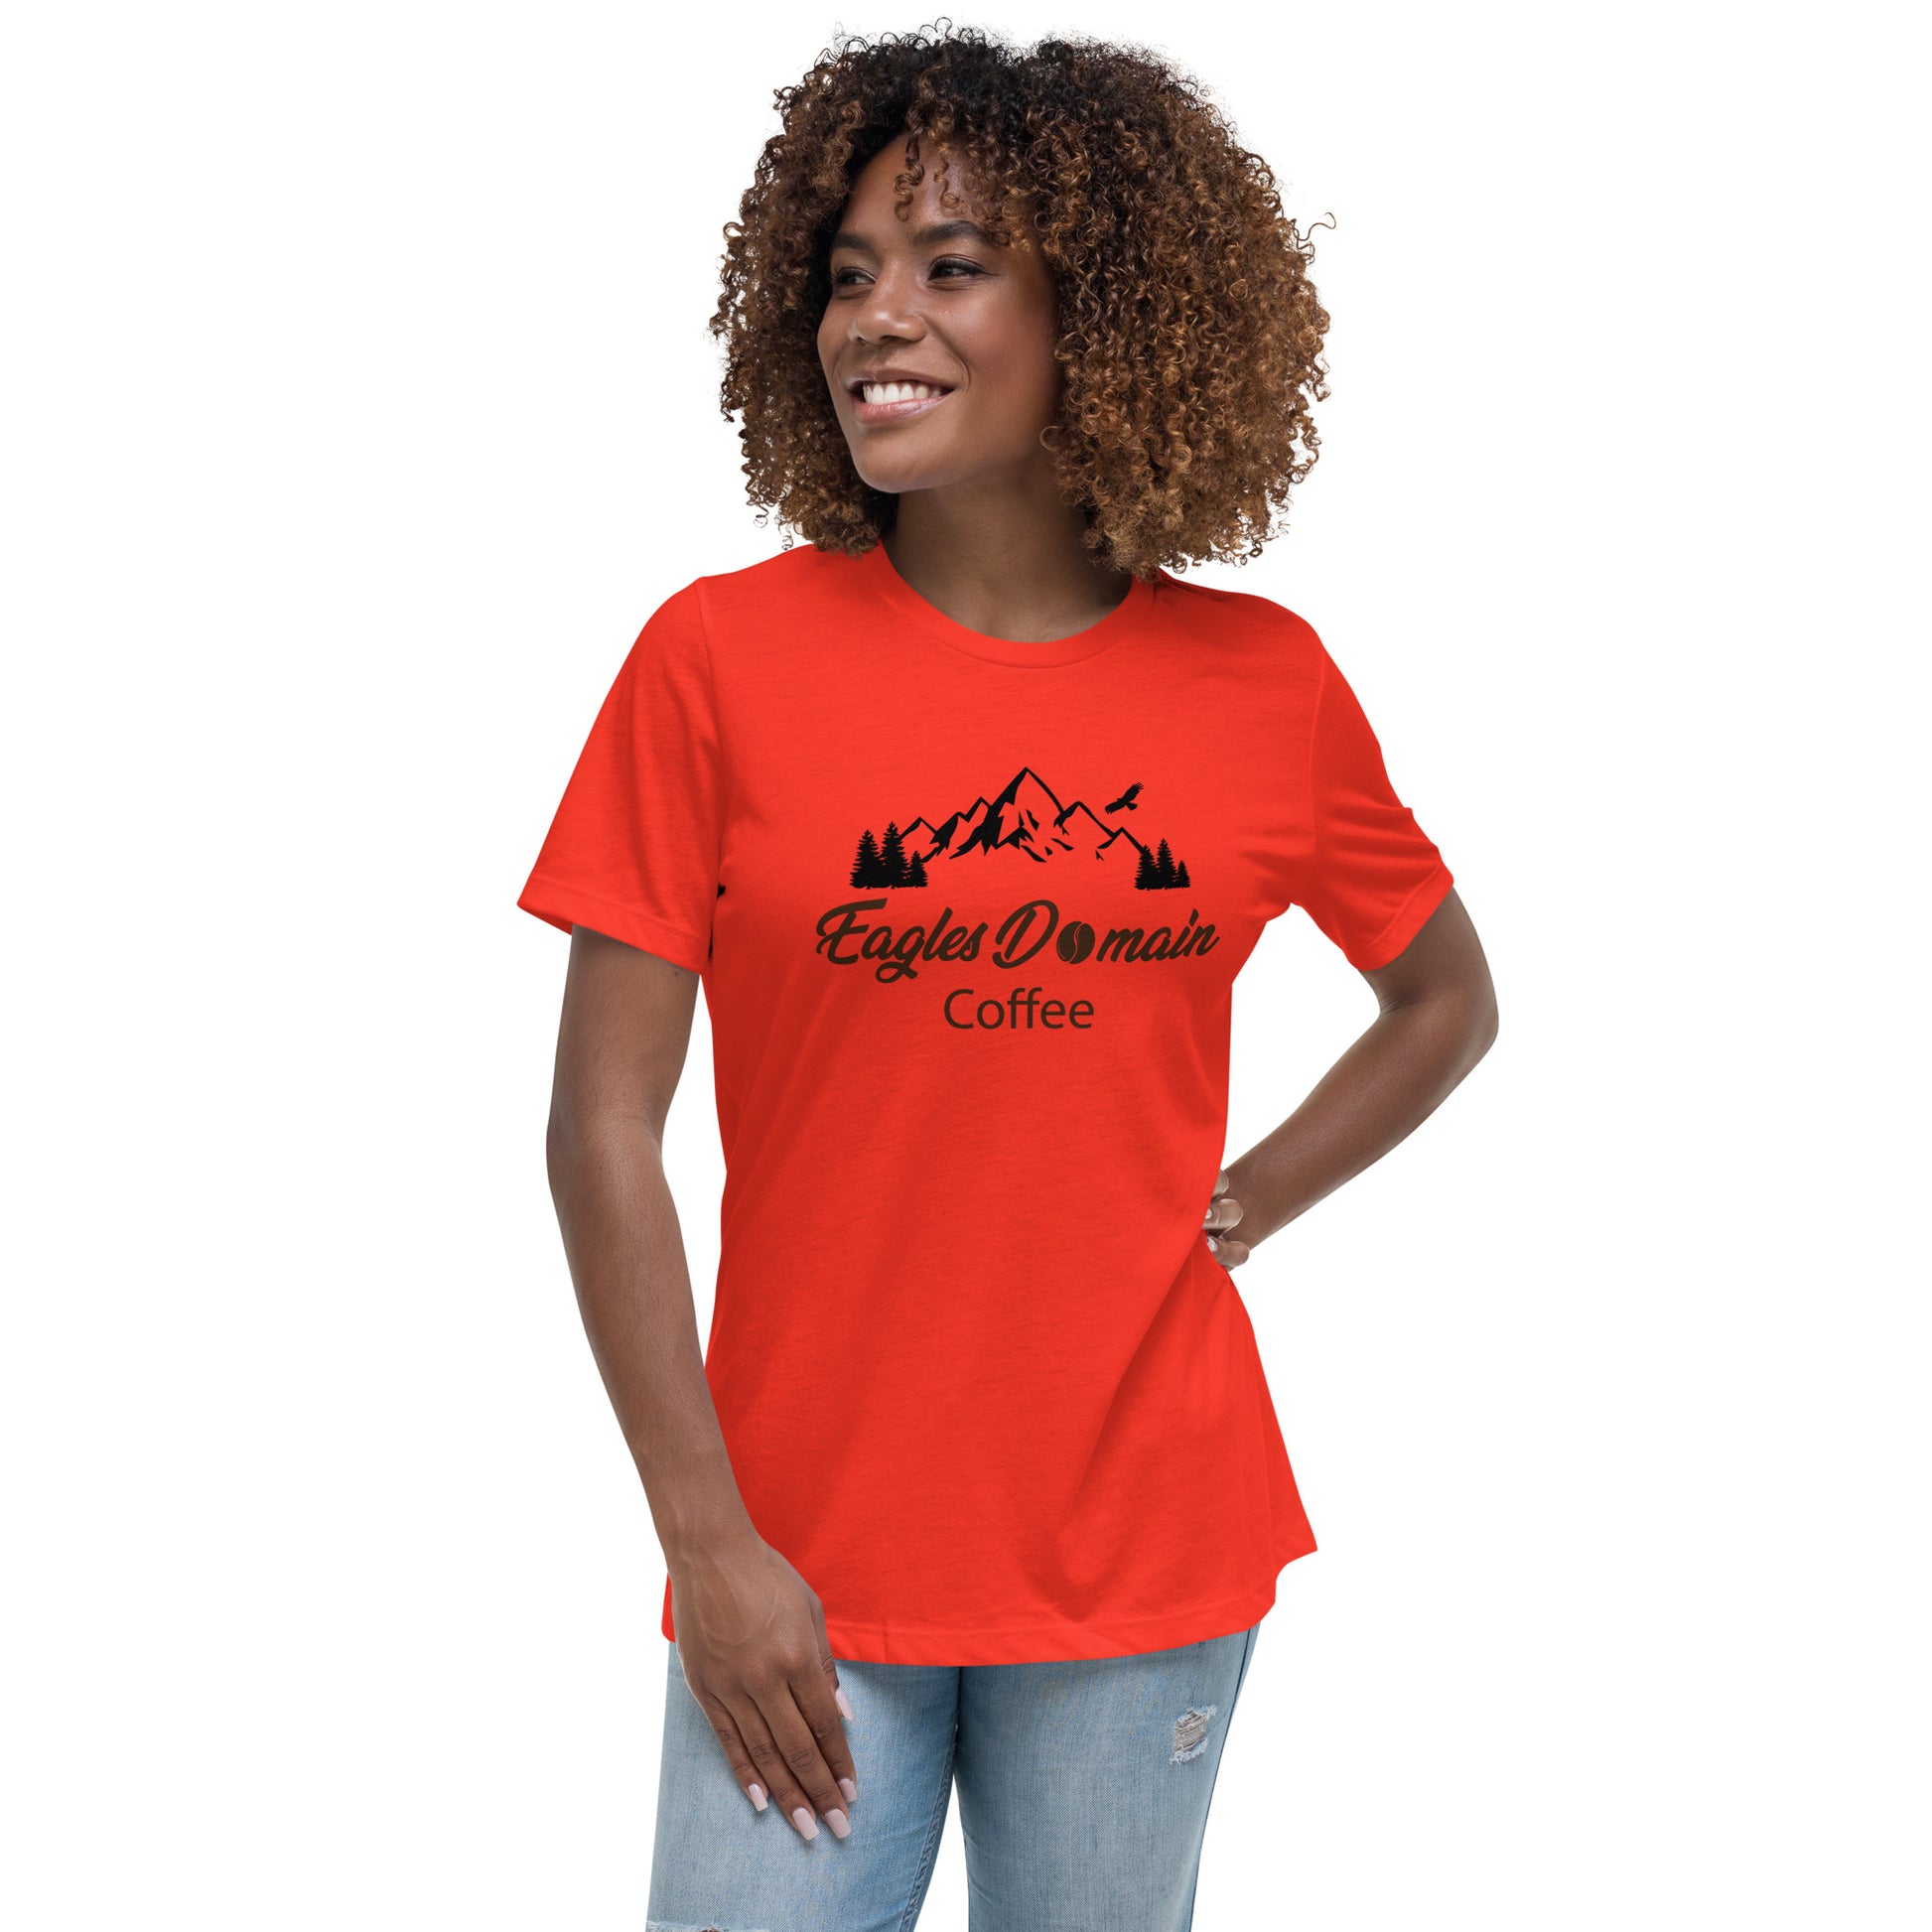 Eagles Domain Coffee Women's Relaxed T-Shirt - Eagles Domain Coffee